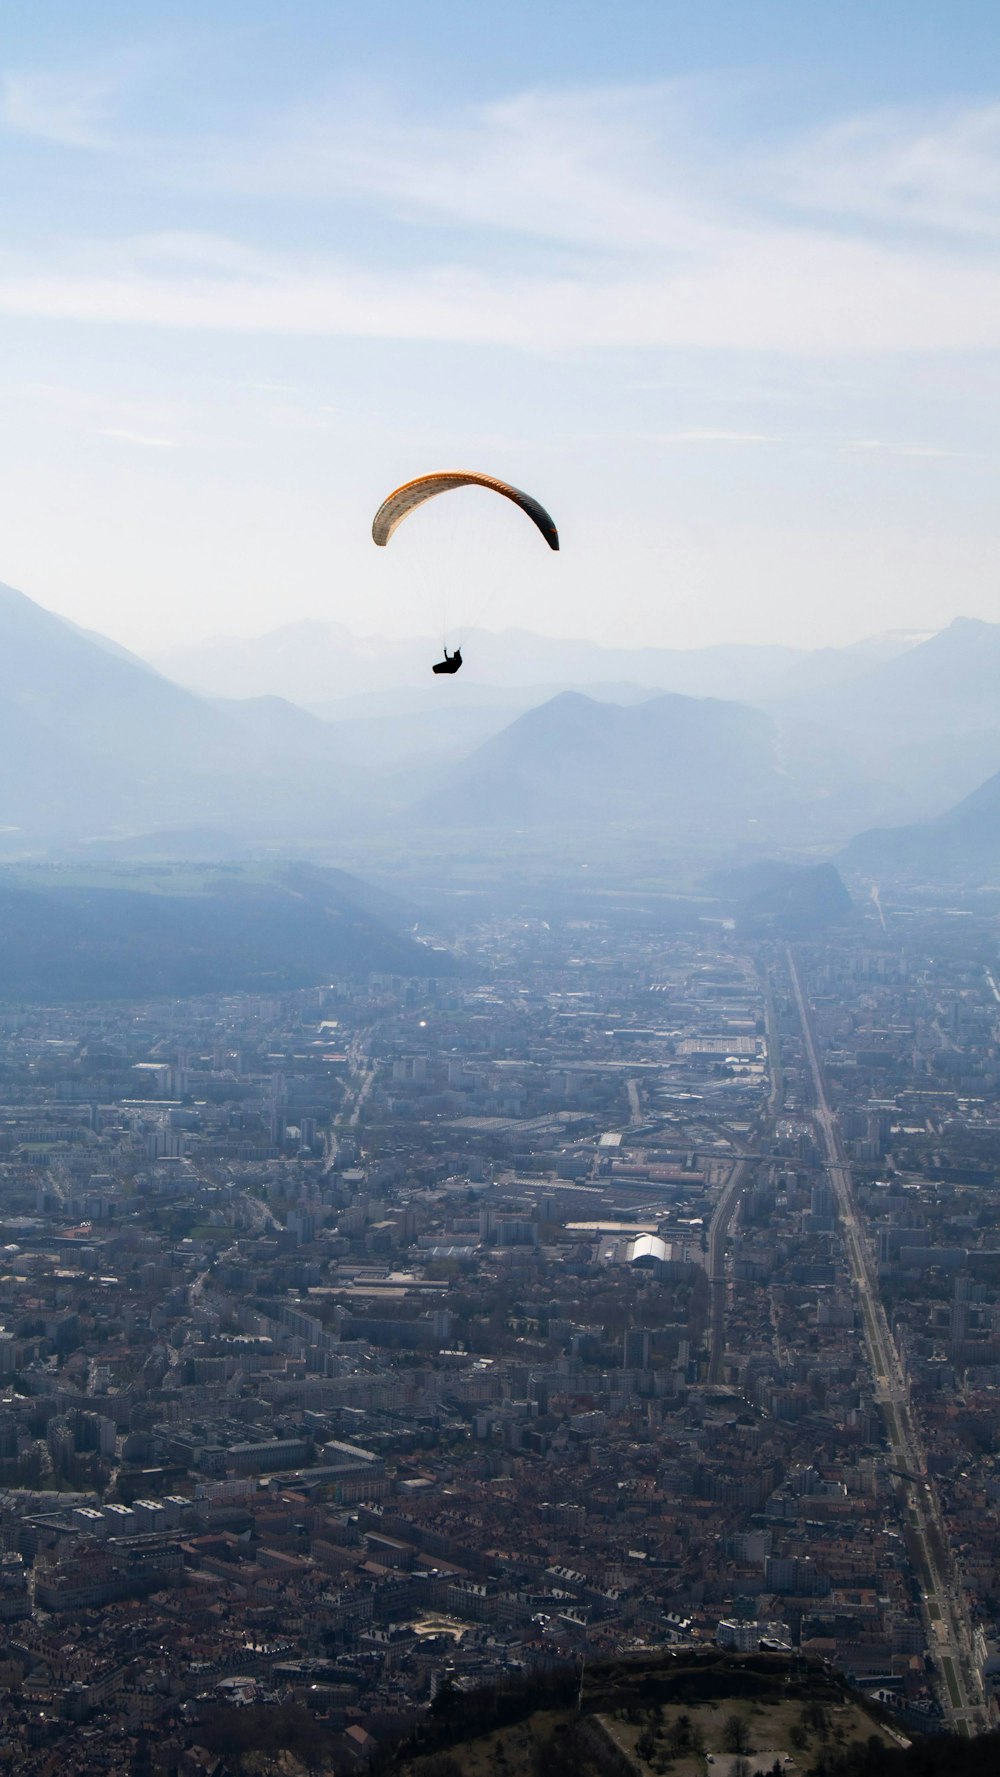 a paraglider flying over a city with mountains in the background